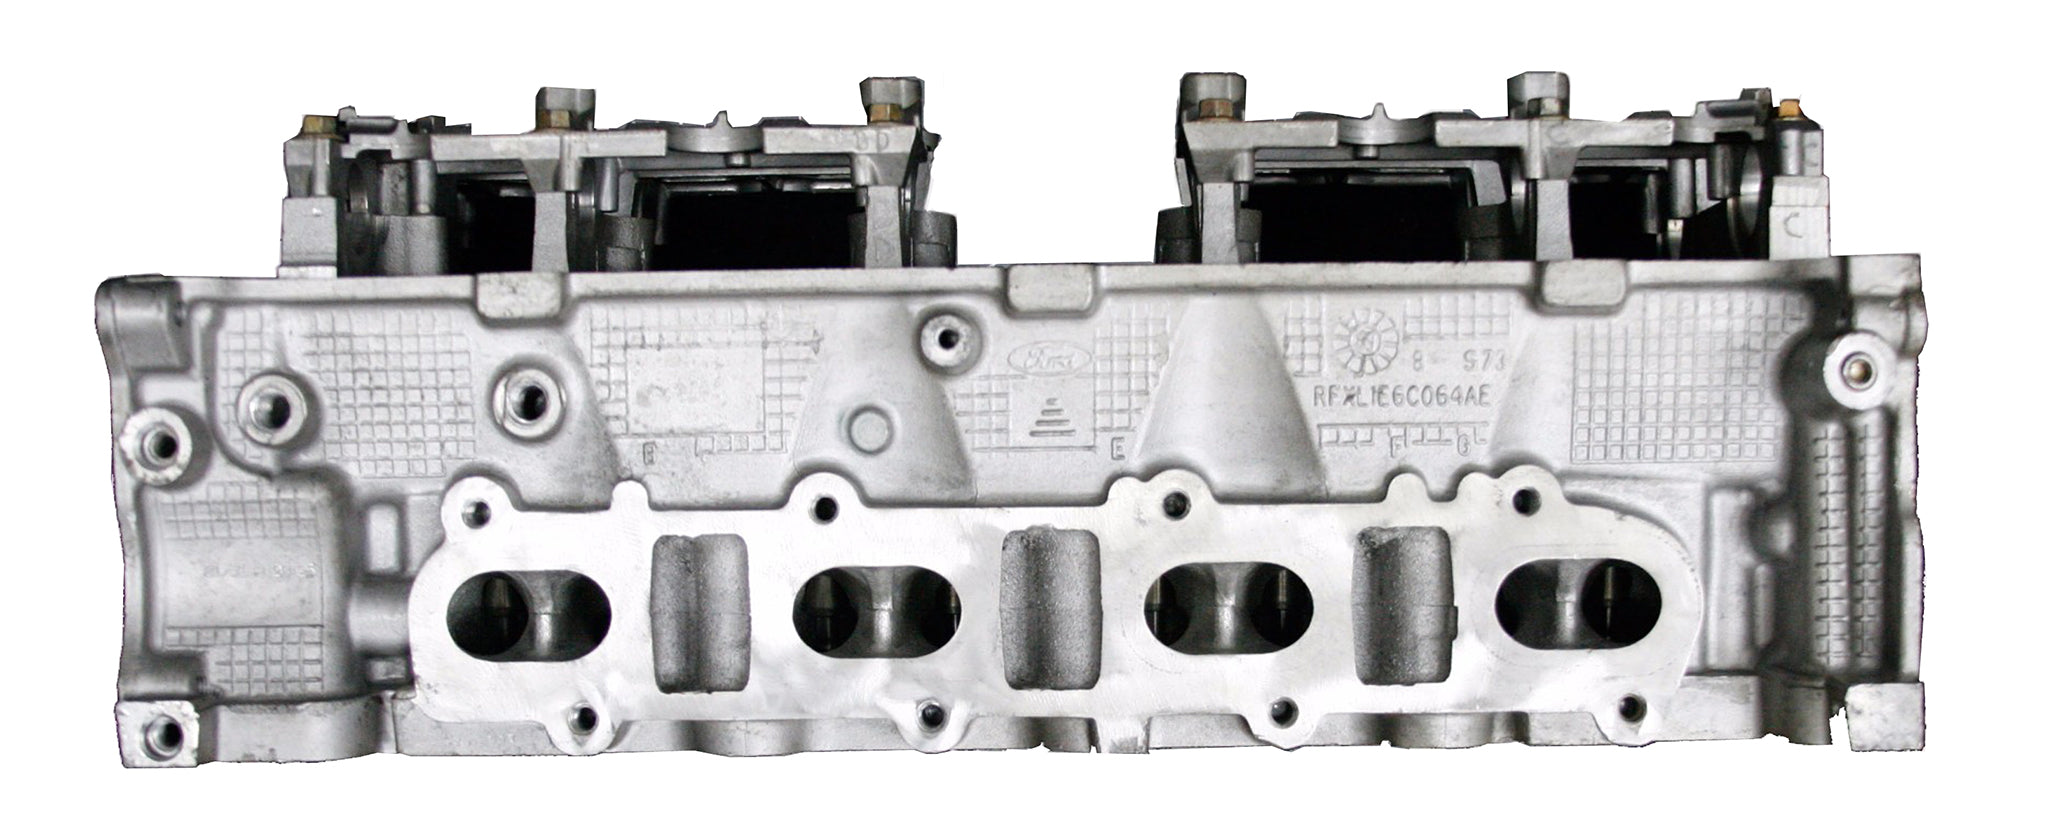 1999-2001 Ford (No Cam/Rockers) Cylinder head Casting # RFXL1E6C064AE Right Side